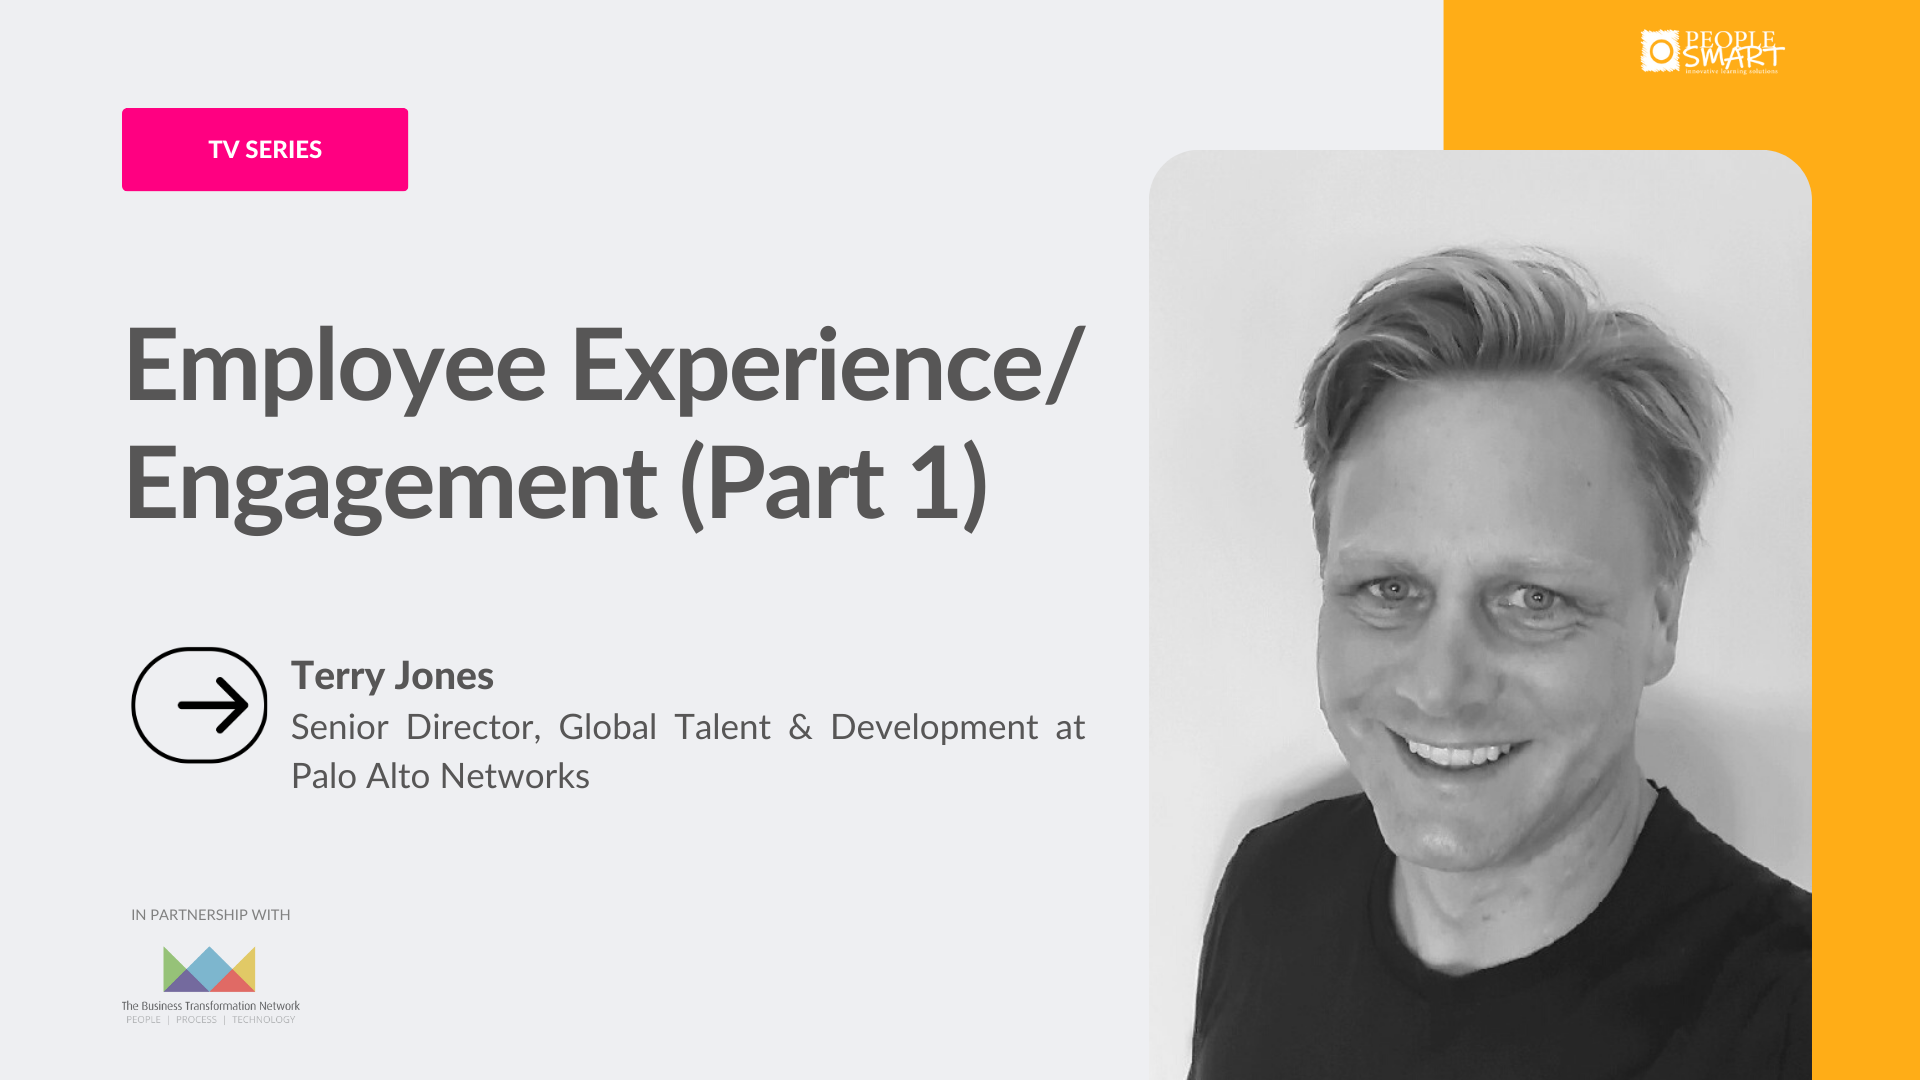 Employee Experience/Engagement with Terry Jones – Part 1